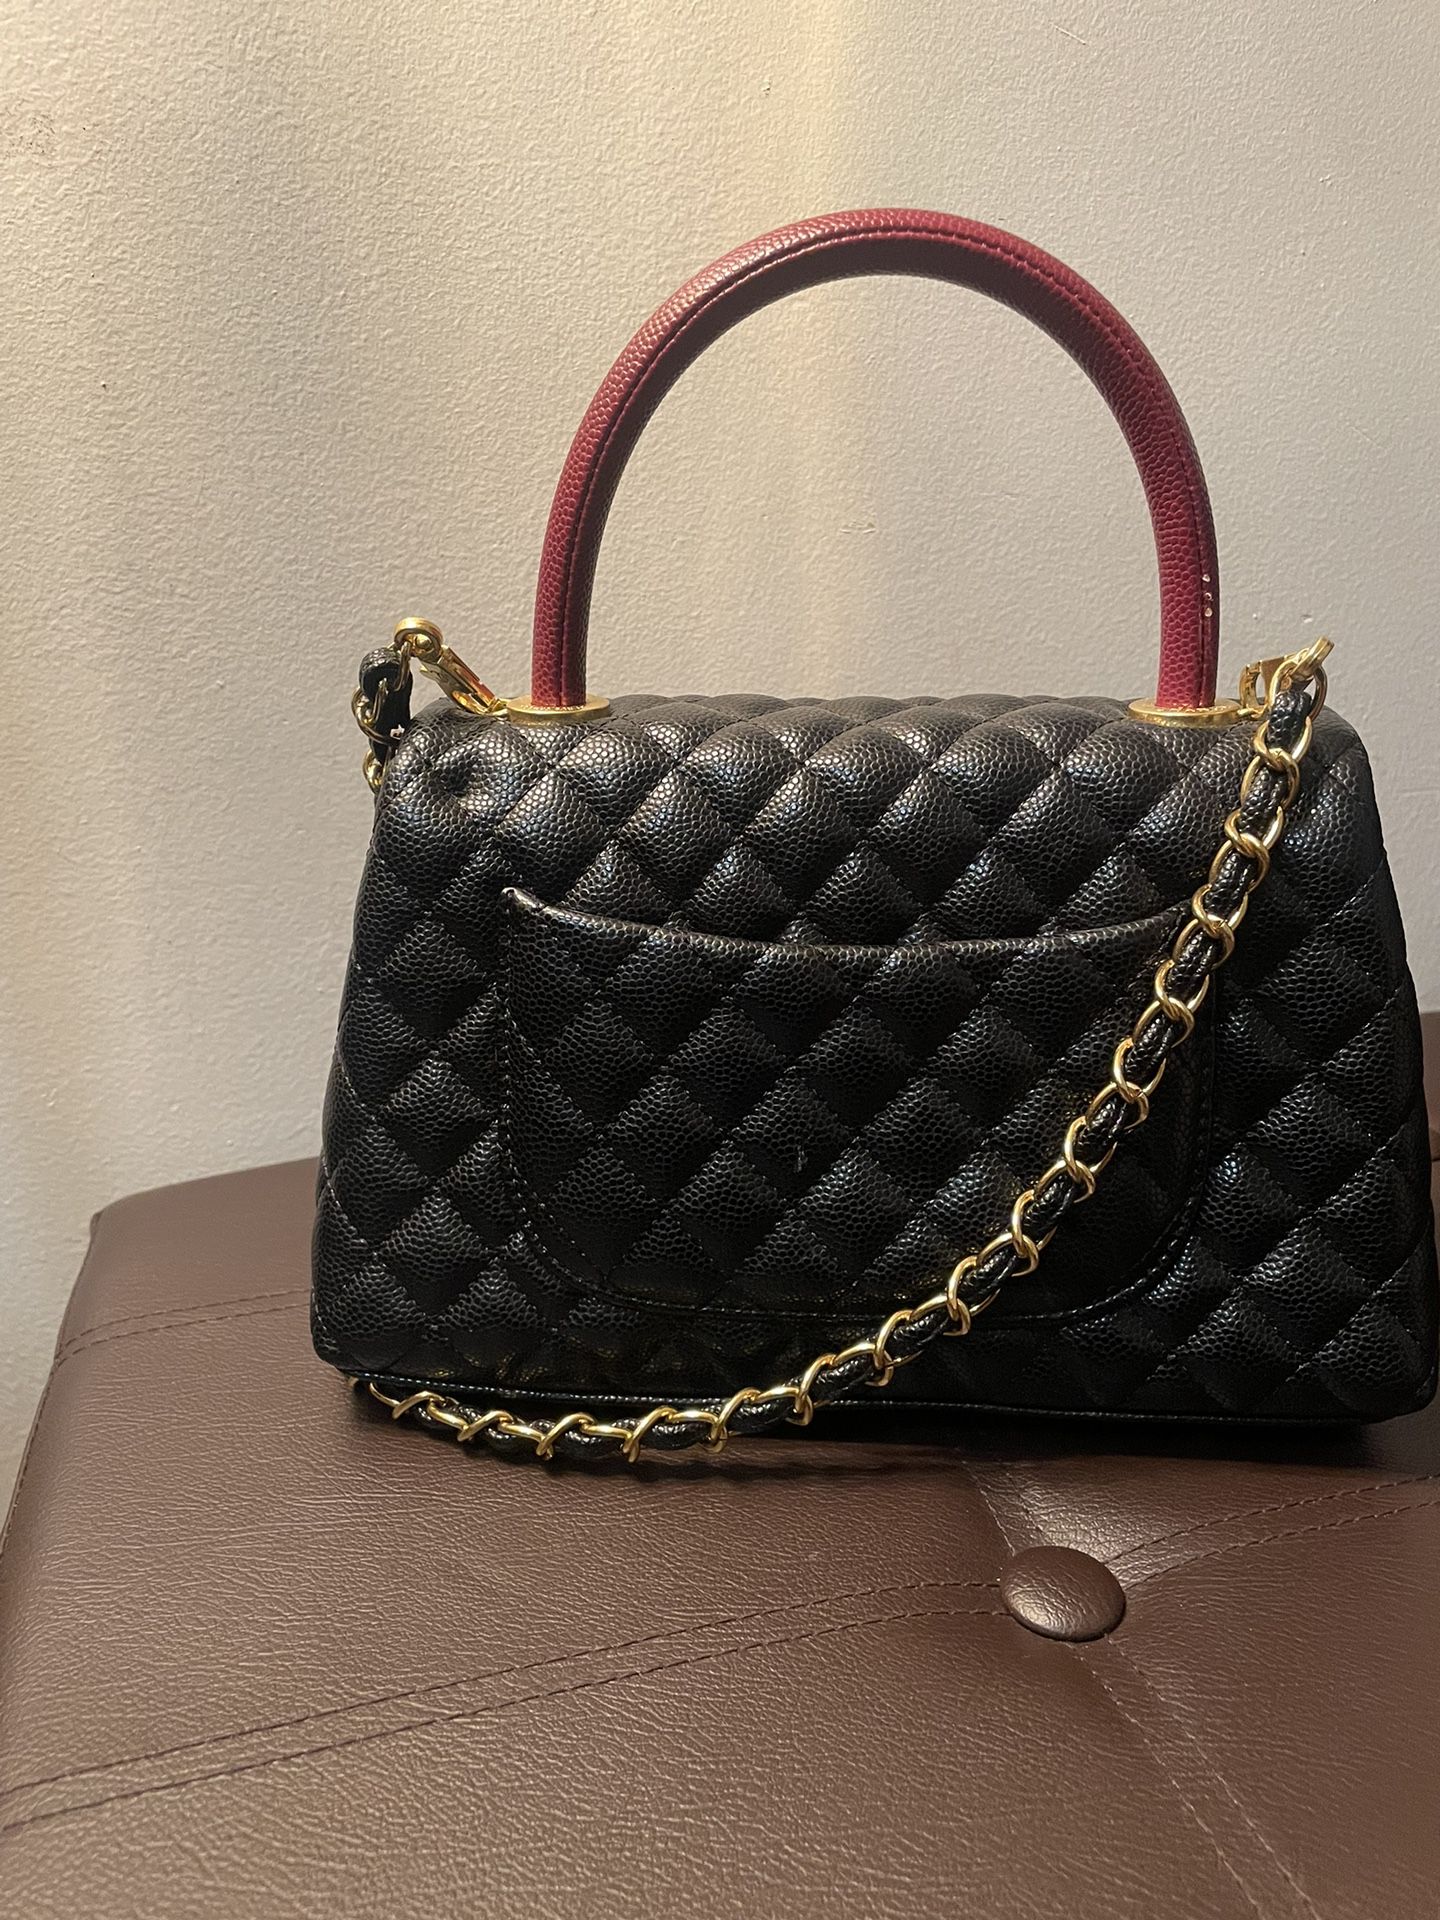 Chanel Bag for Sale in The Bronx, NY - OfferUp